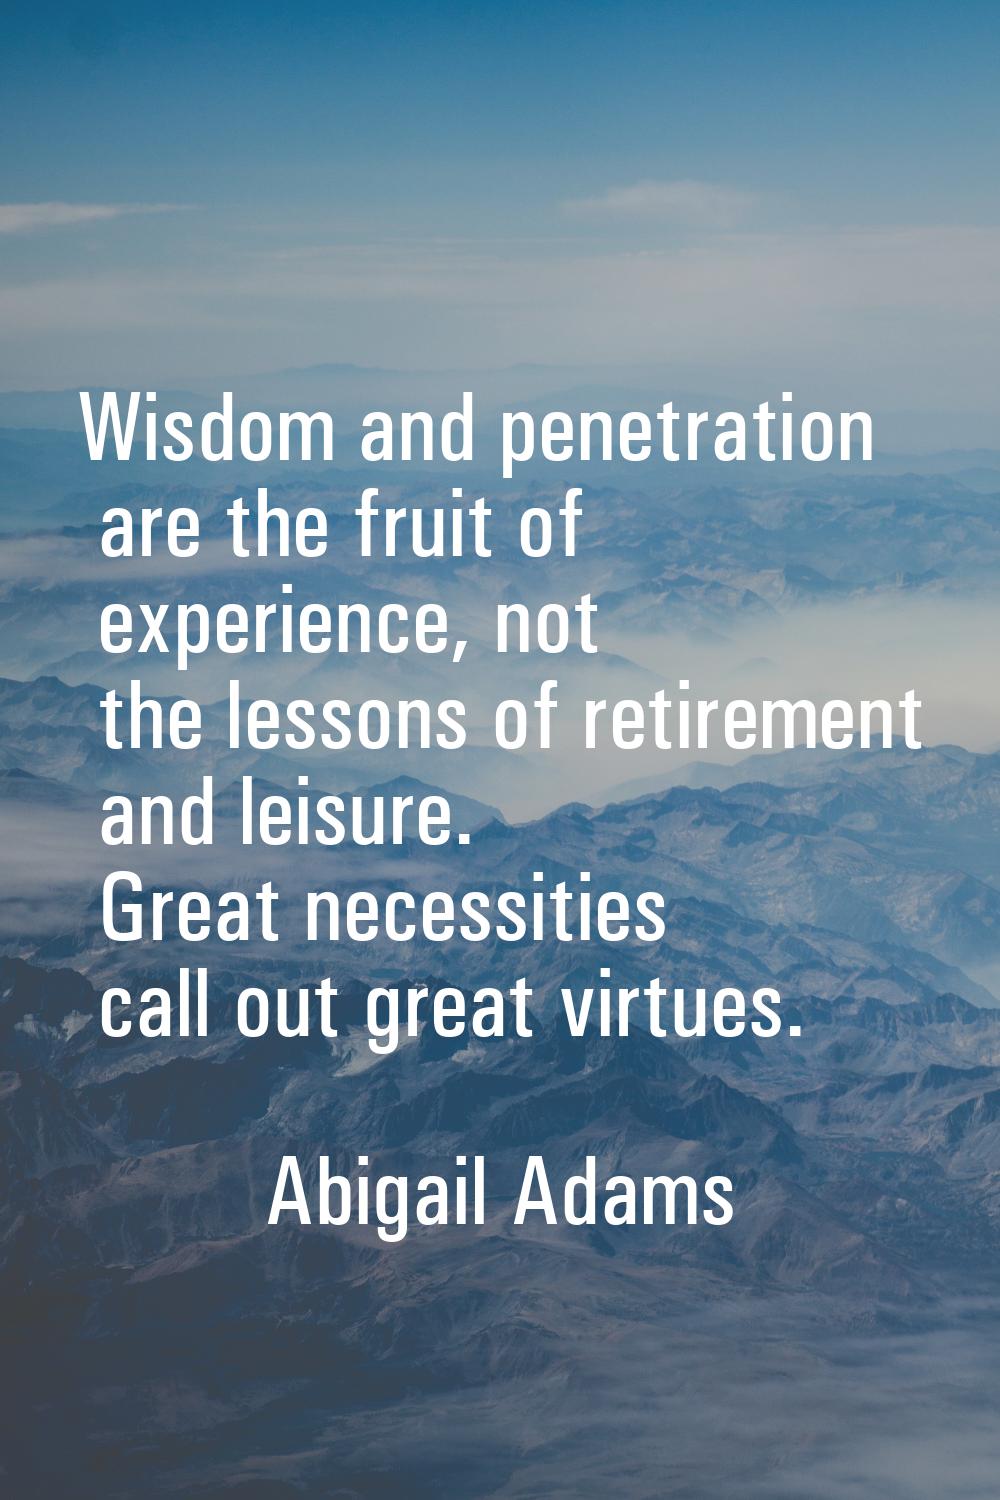 Wisdom and penetration are the fruit of experience, not the lessons of retirement and leisure. Grea